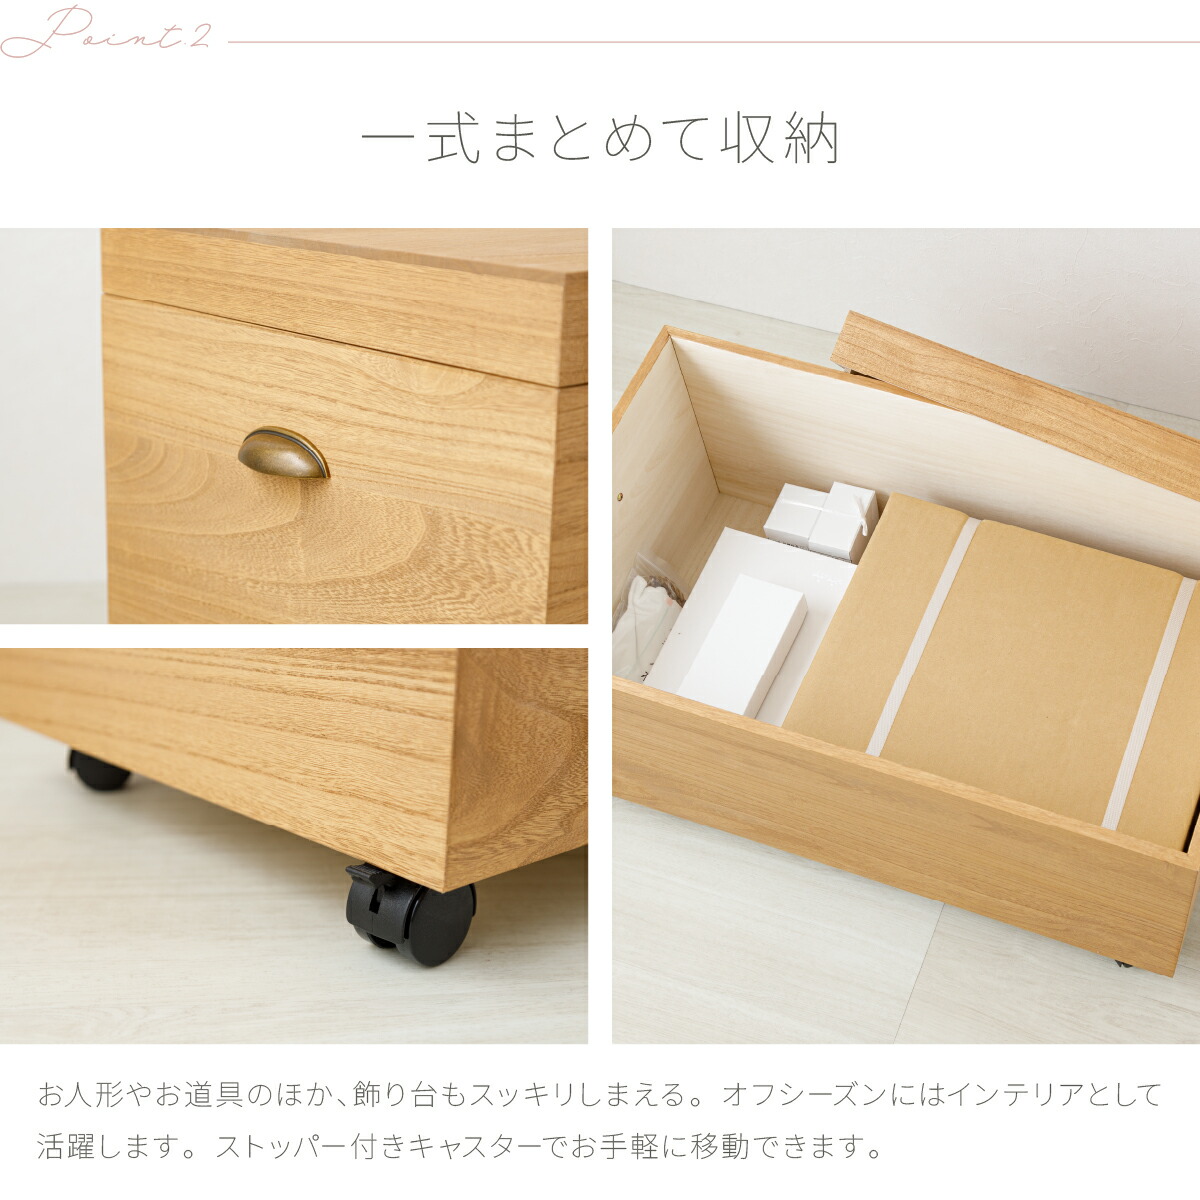 .... for doll hinaningyo option total . storage box W700 is possible to choose 2 kind color single goods sale special selection 